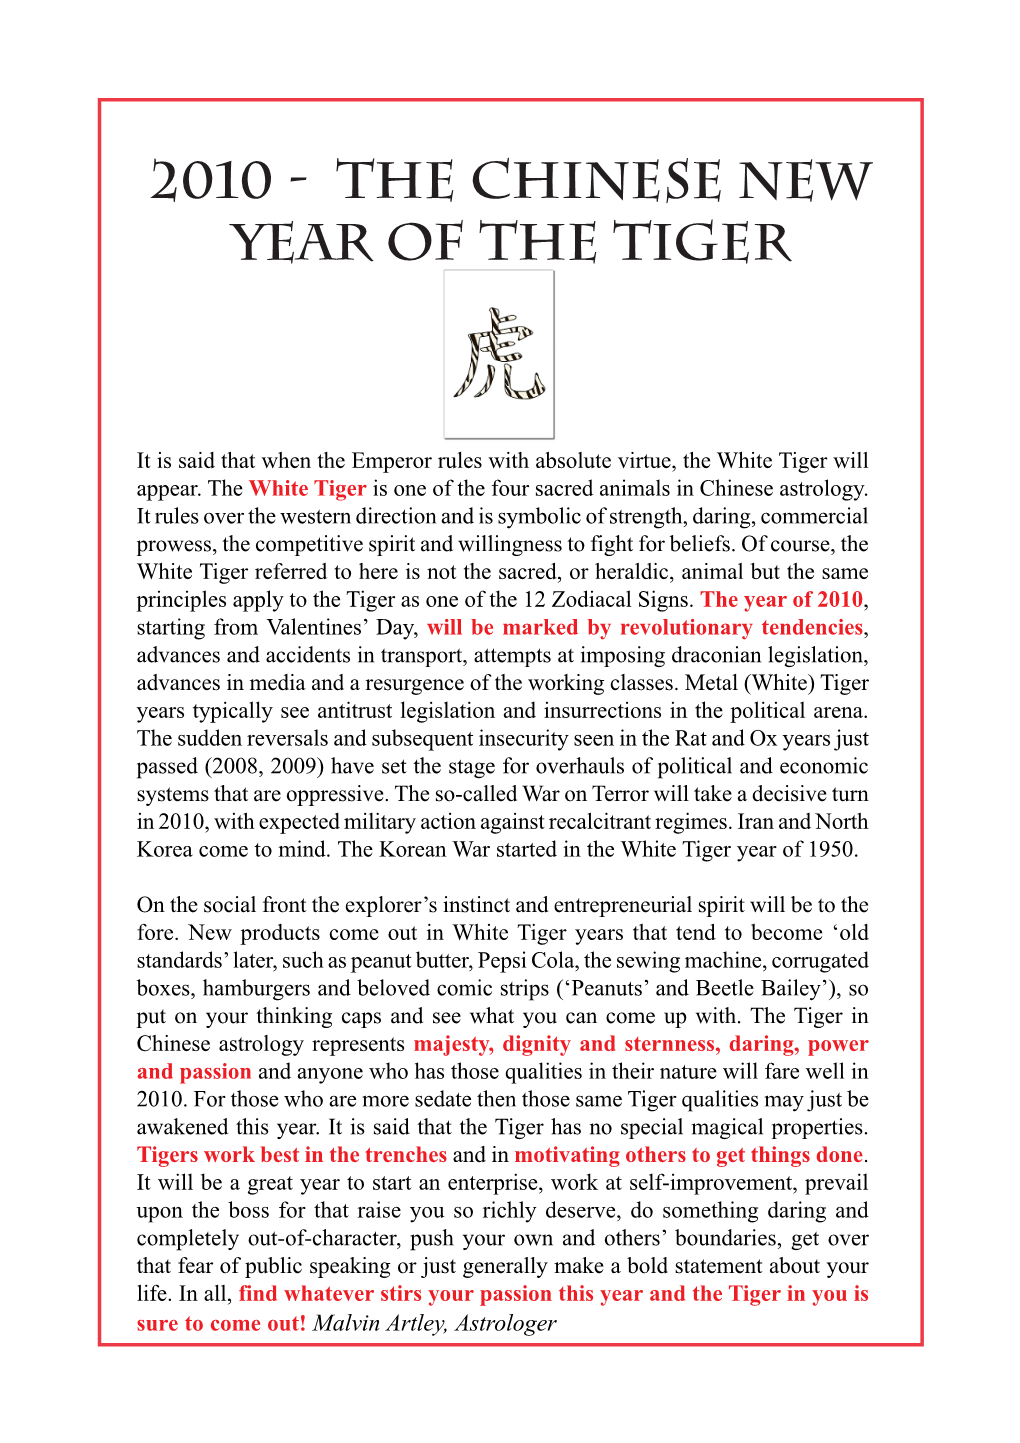 2010 - the CHINESE NEW YEAR of the Tiger